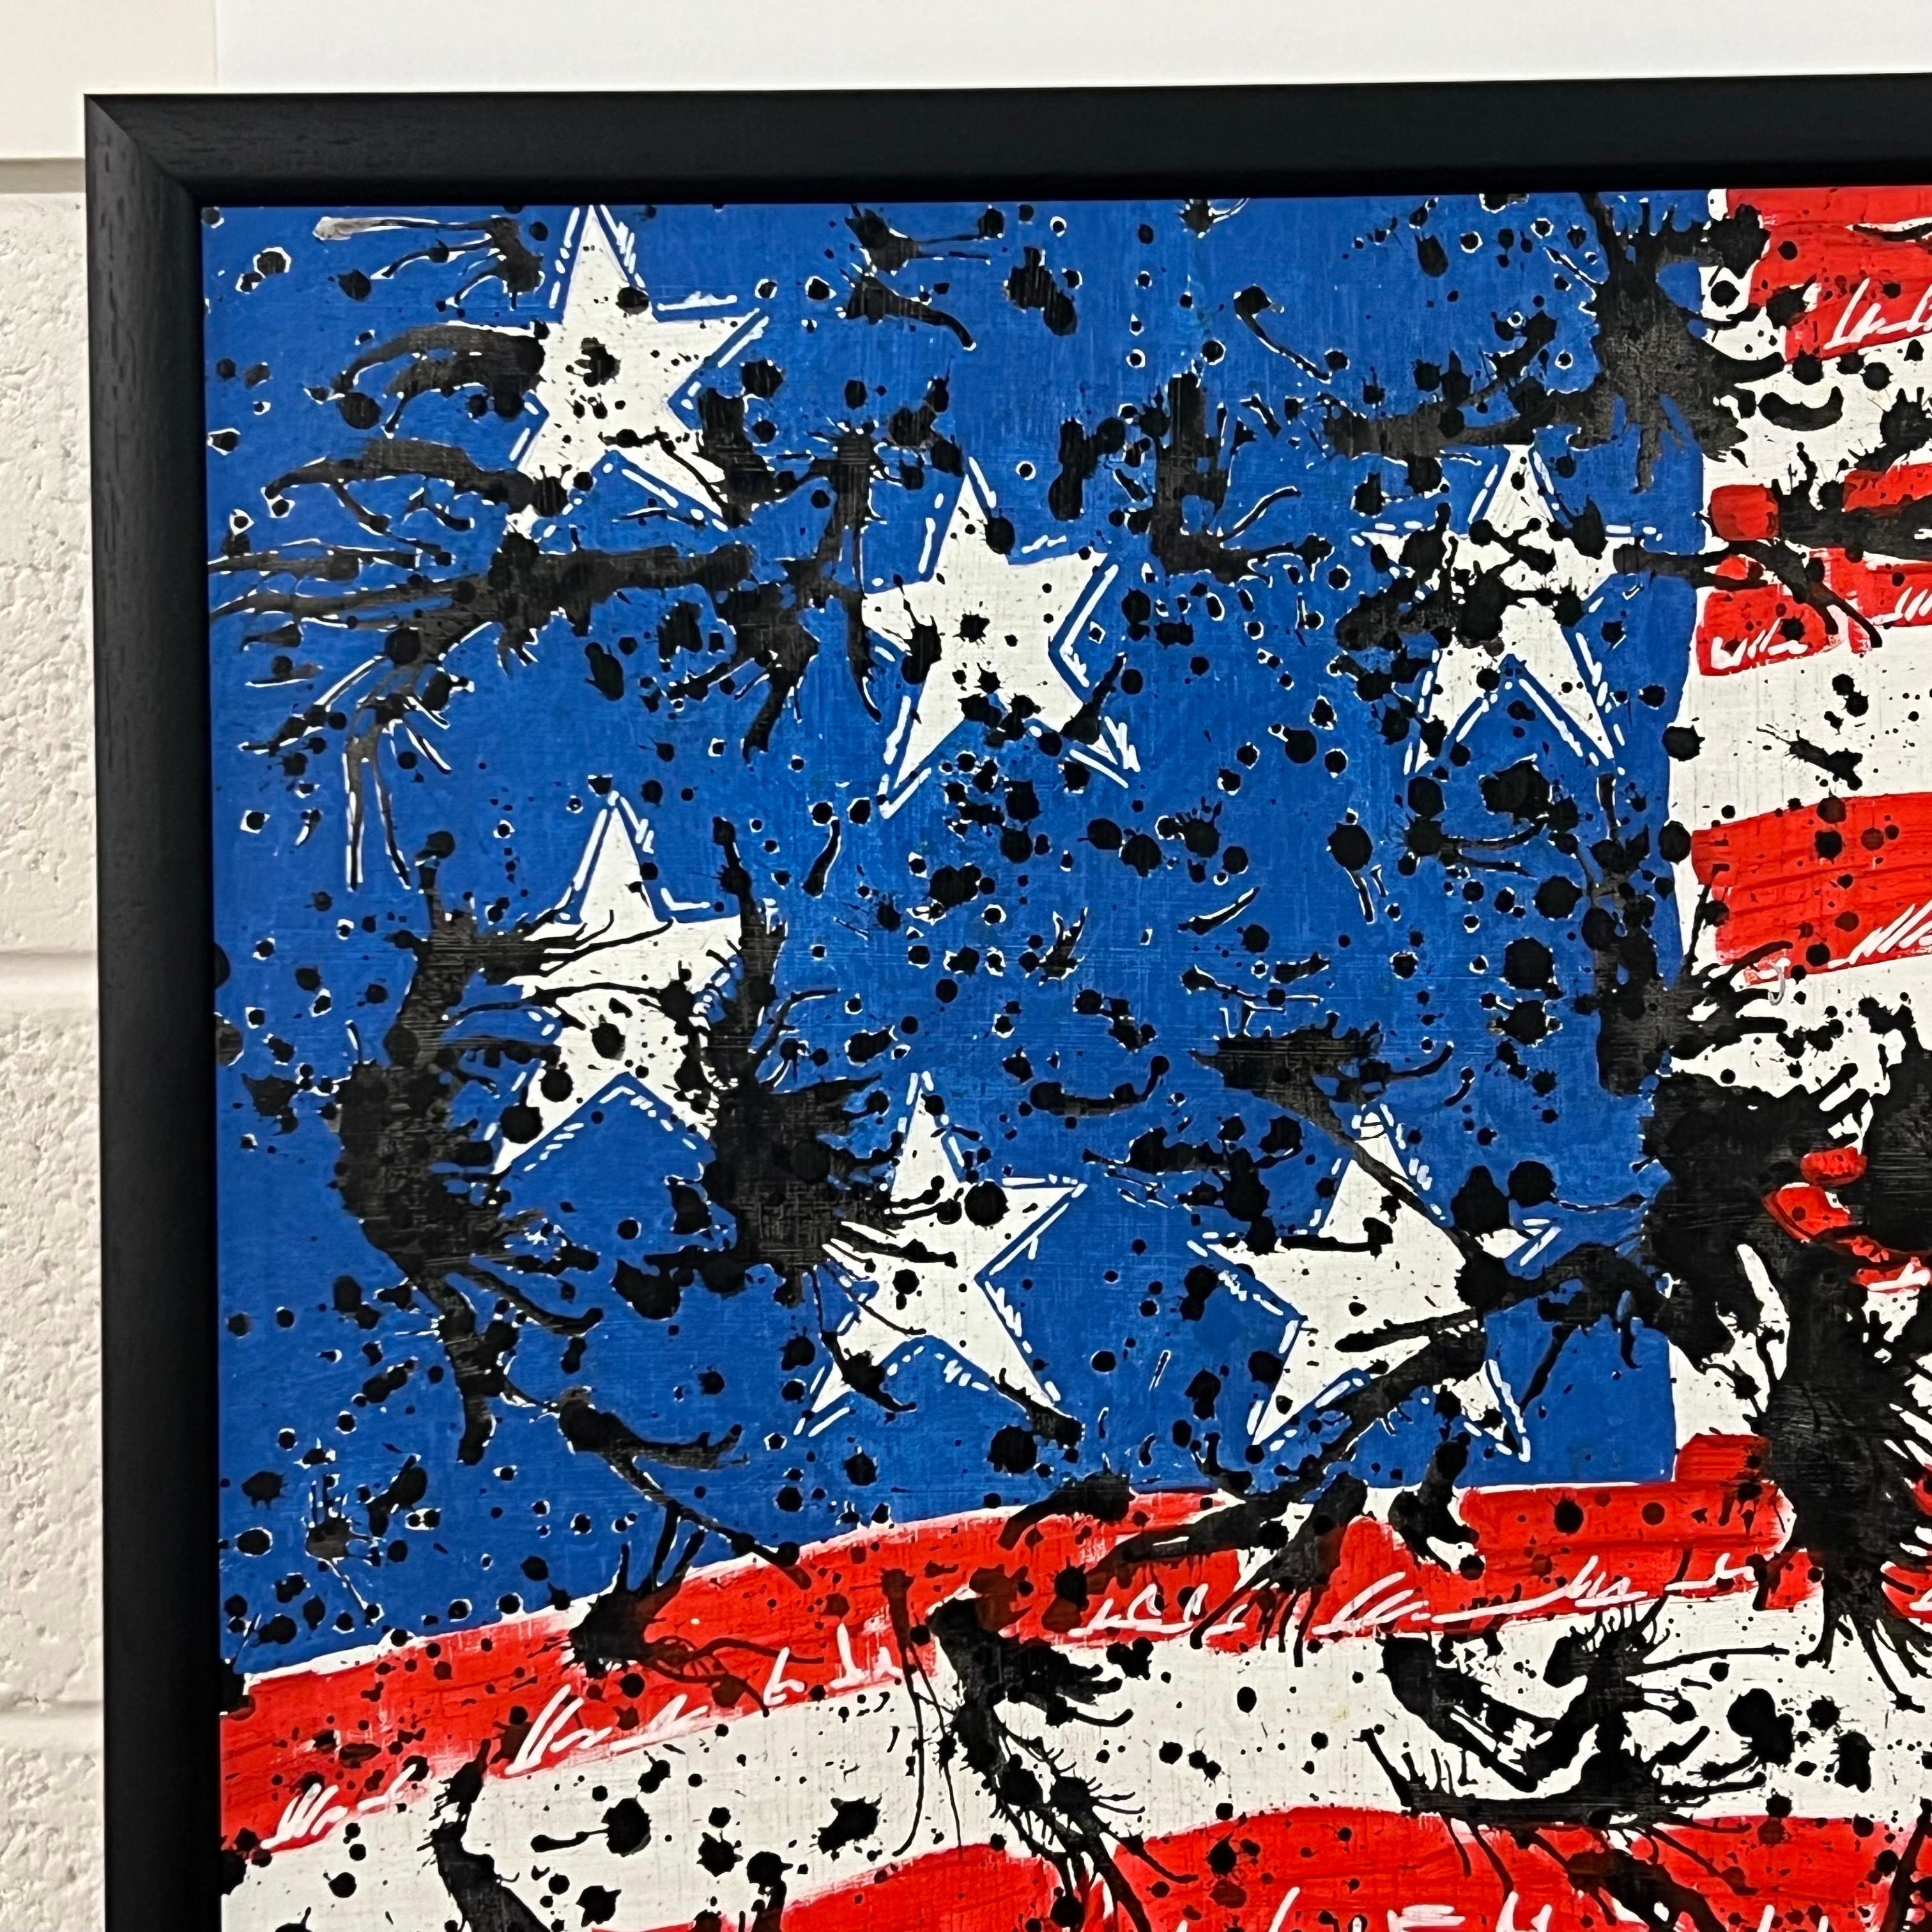 Stars & Stripes Painting entitled 'A Bit Rich' by British Urban Graffiti Artist, Chris Pegg, using red, white, black & blue. Chris Pegg is a self-taught Street Artist producing artwork with a strong social commentary. 

Art measures 24 x 24 inches